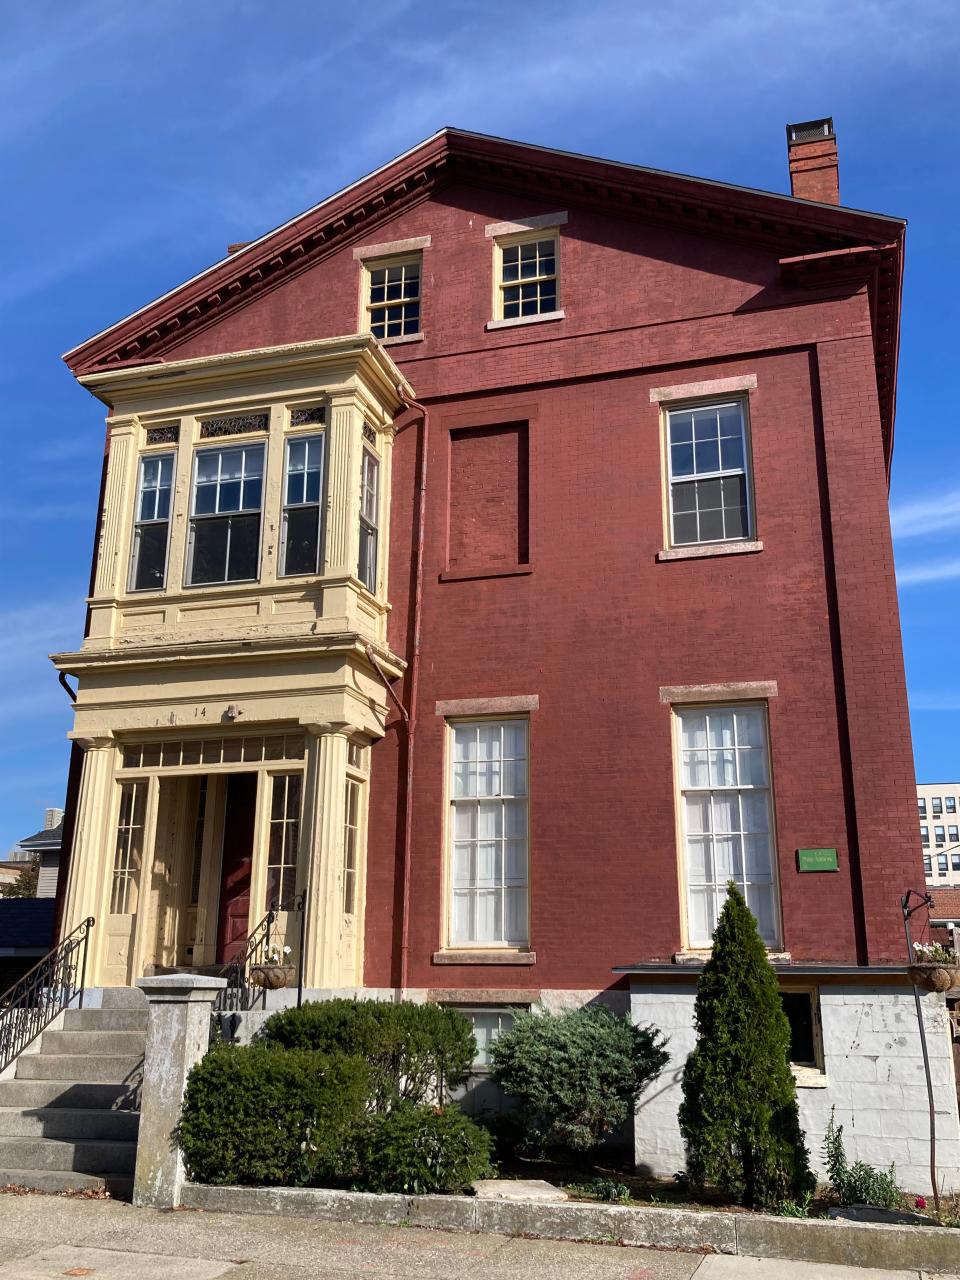 This brick building at 14 South Sixth St. is an early example of a Greek Revival study home, according to the New Bedford Preservation Society.